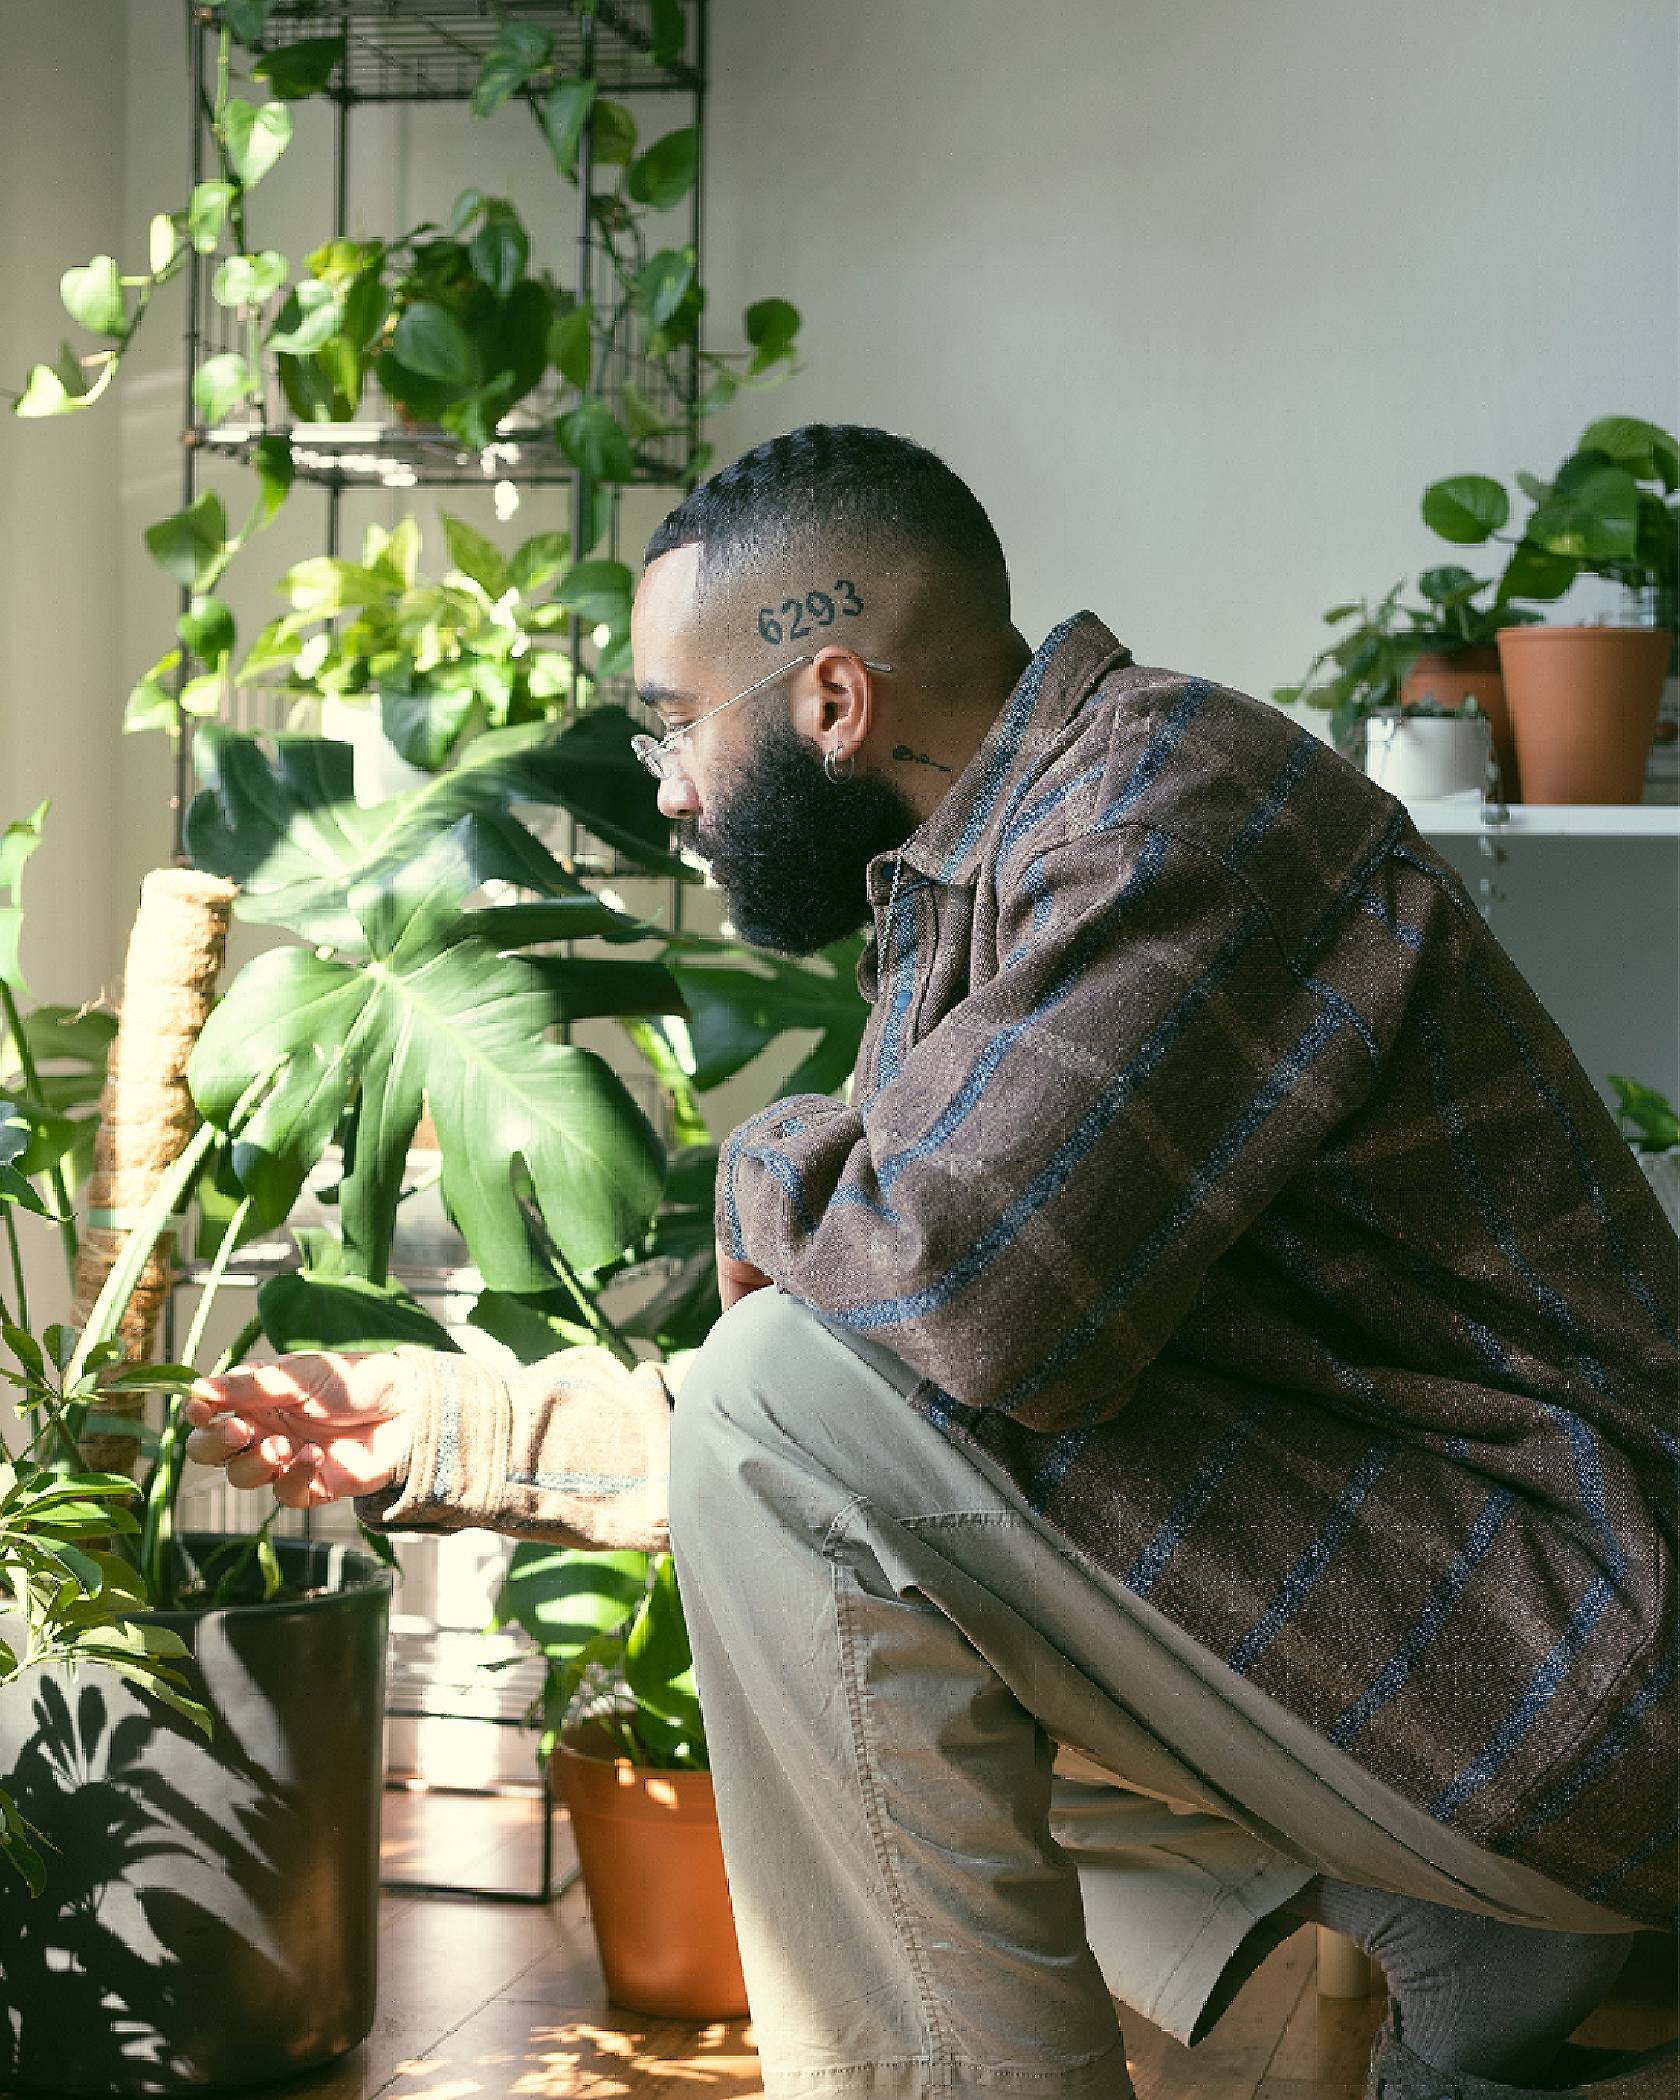 Image of Paul Bellas kneeling next to a row of plants while wearing cargo pants and a Levi's® Made & Crafted plaid brown shirt.